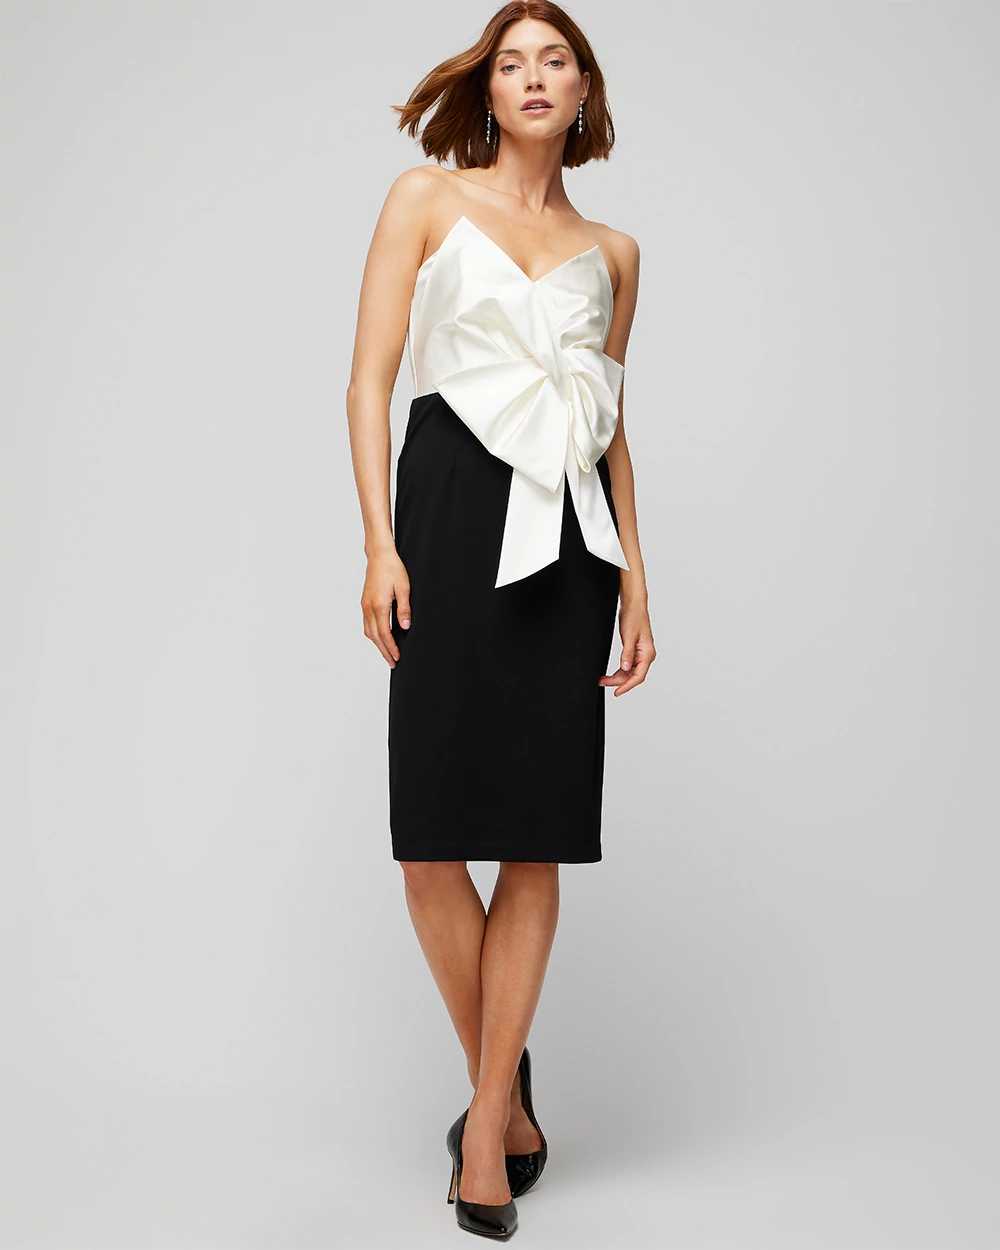 Strapless Contrast Bow Dress click to view larger image.